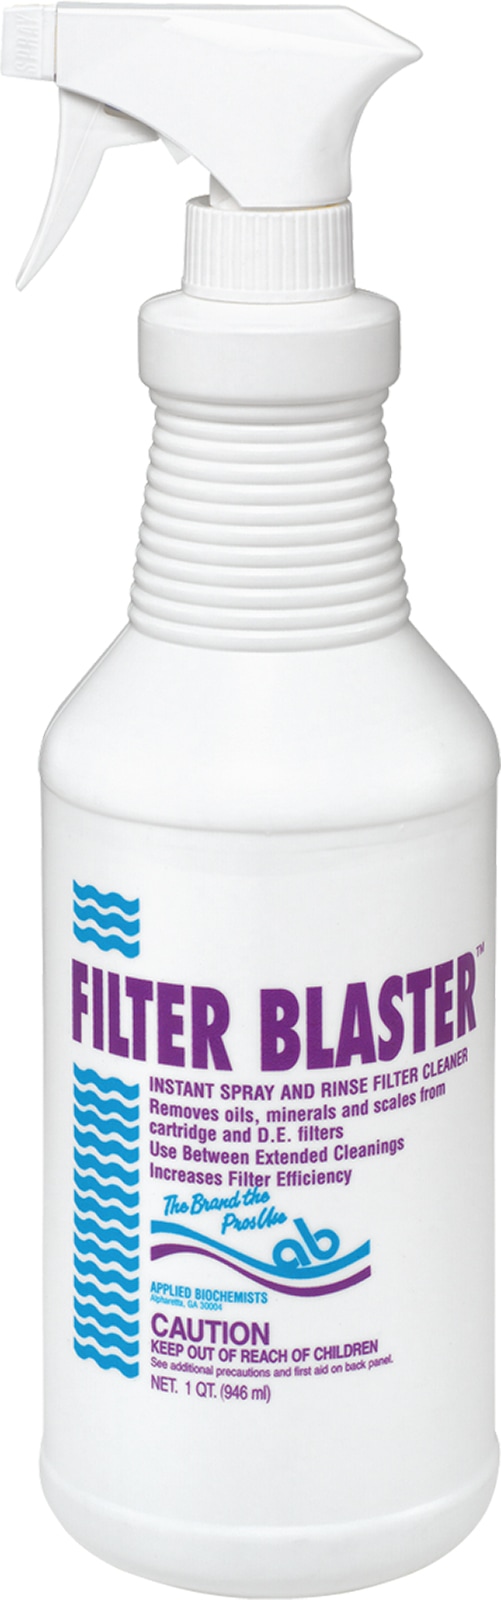 Product-400720A AB_FilterBlaster_32oz